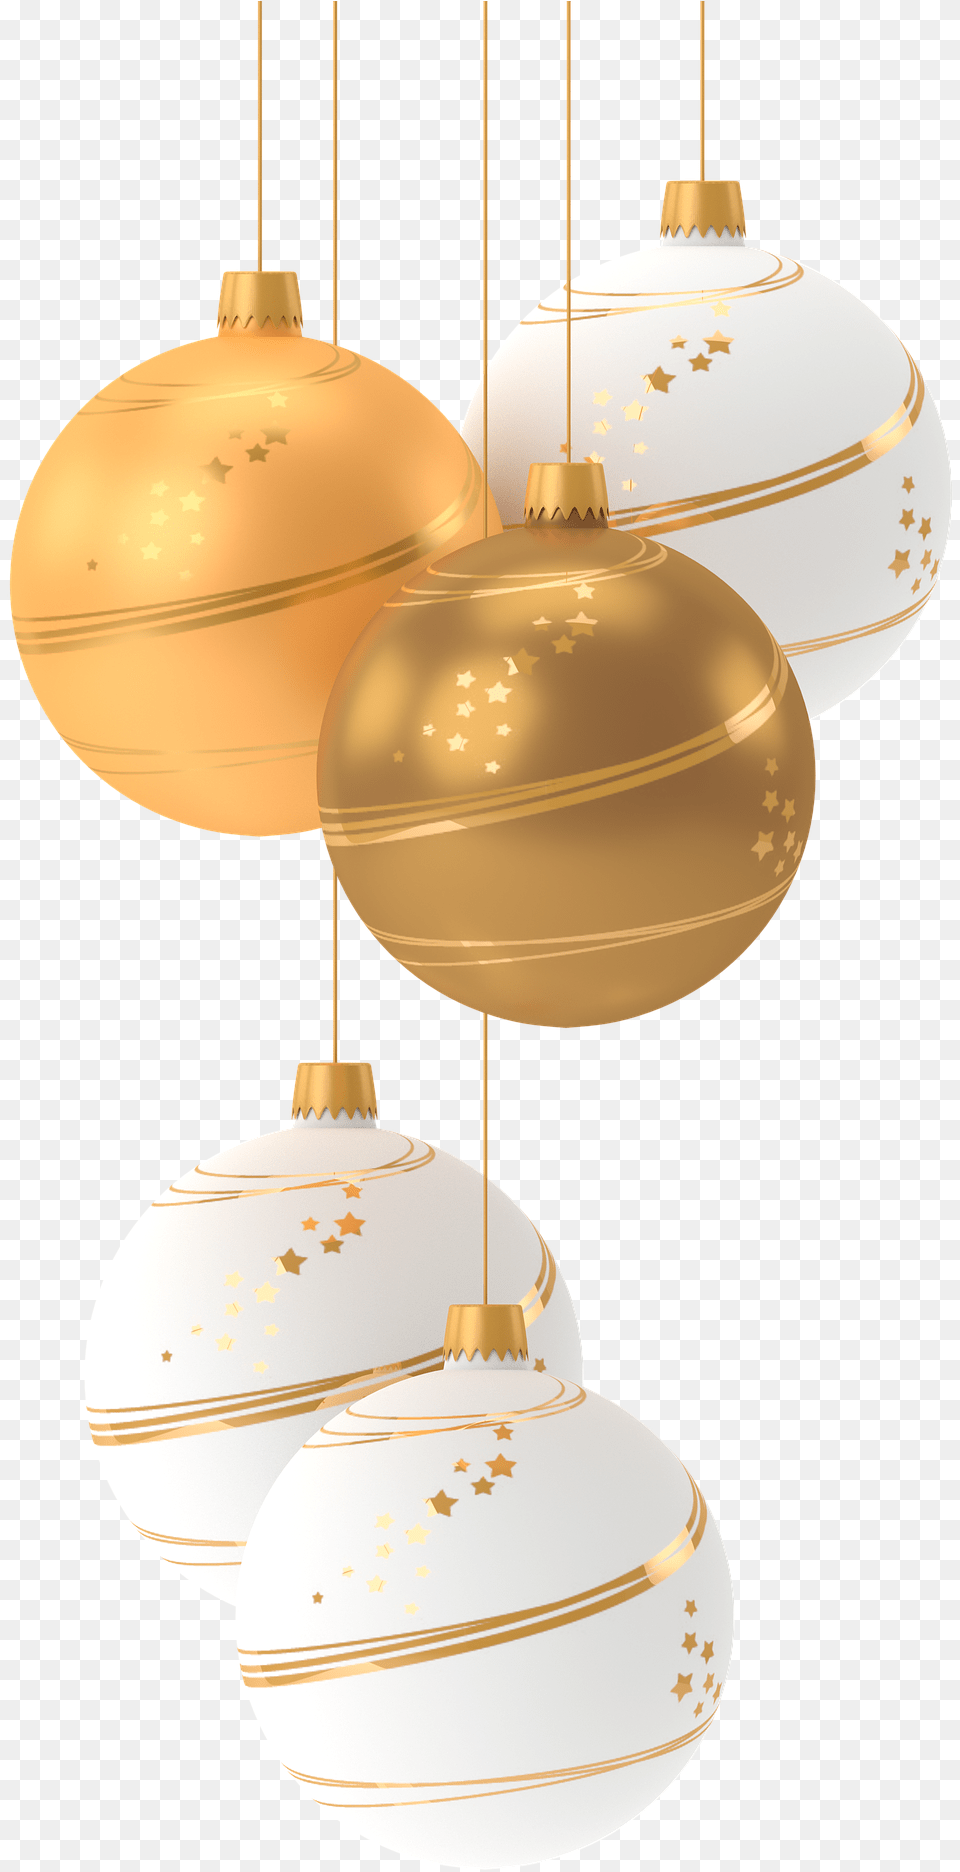 Christmas Toy Jewelry Christmas Toys Jewelry Transparent Background Christmas, Lamp, Lighting Png